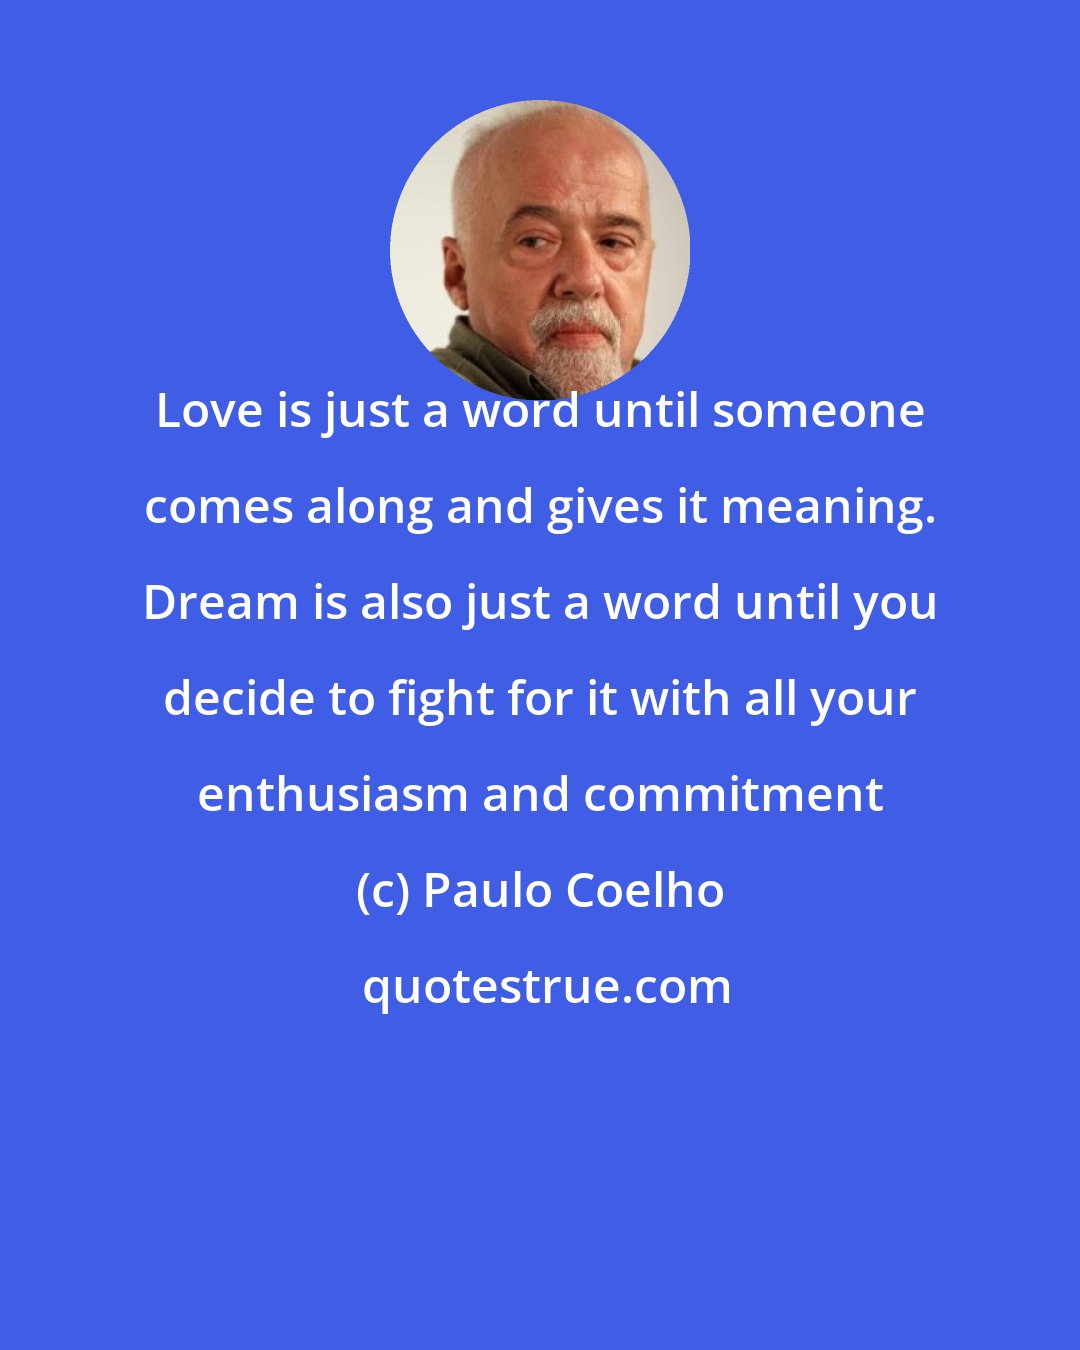 Paulo Coelho: Love is just a word until someone comes along and gives it meaning. Dream is also just a word until you decide to fight for it with all your enthusiasm and commitment